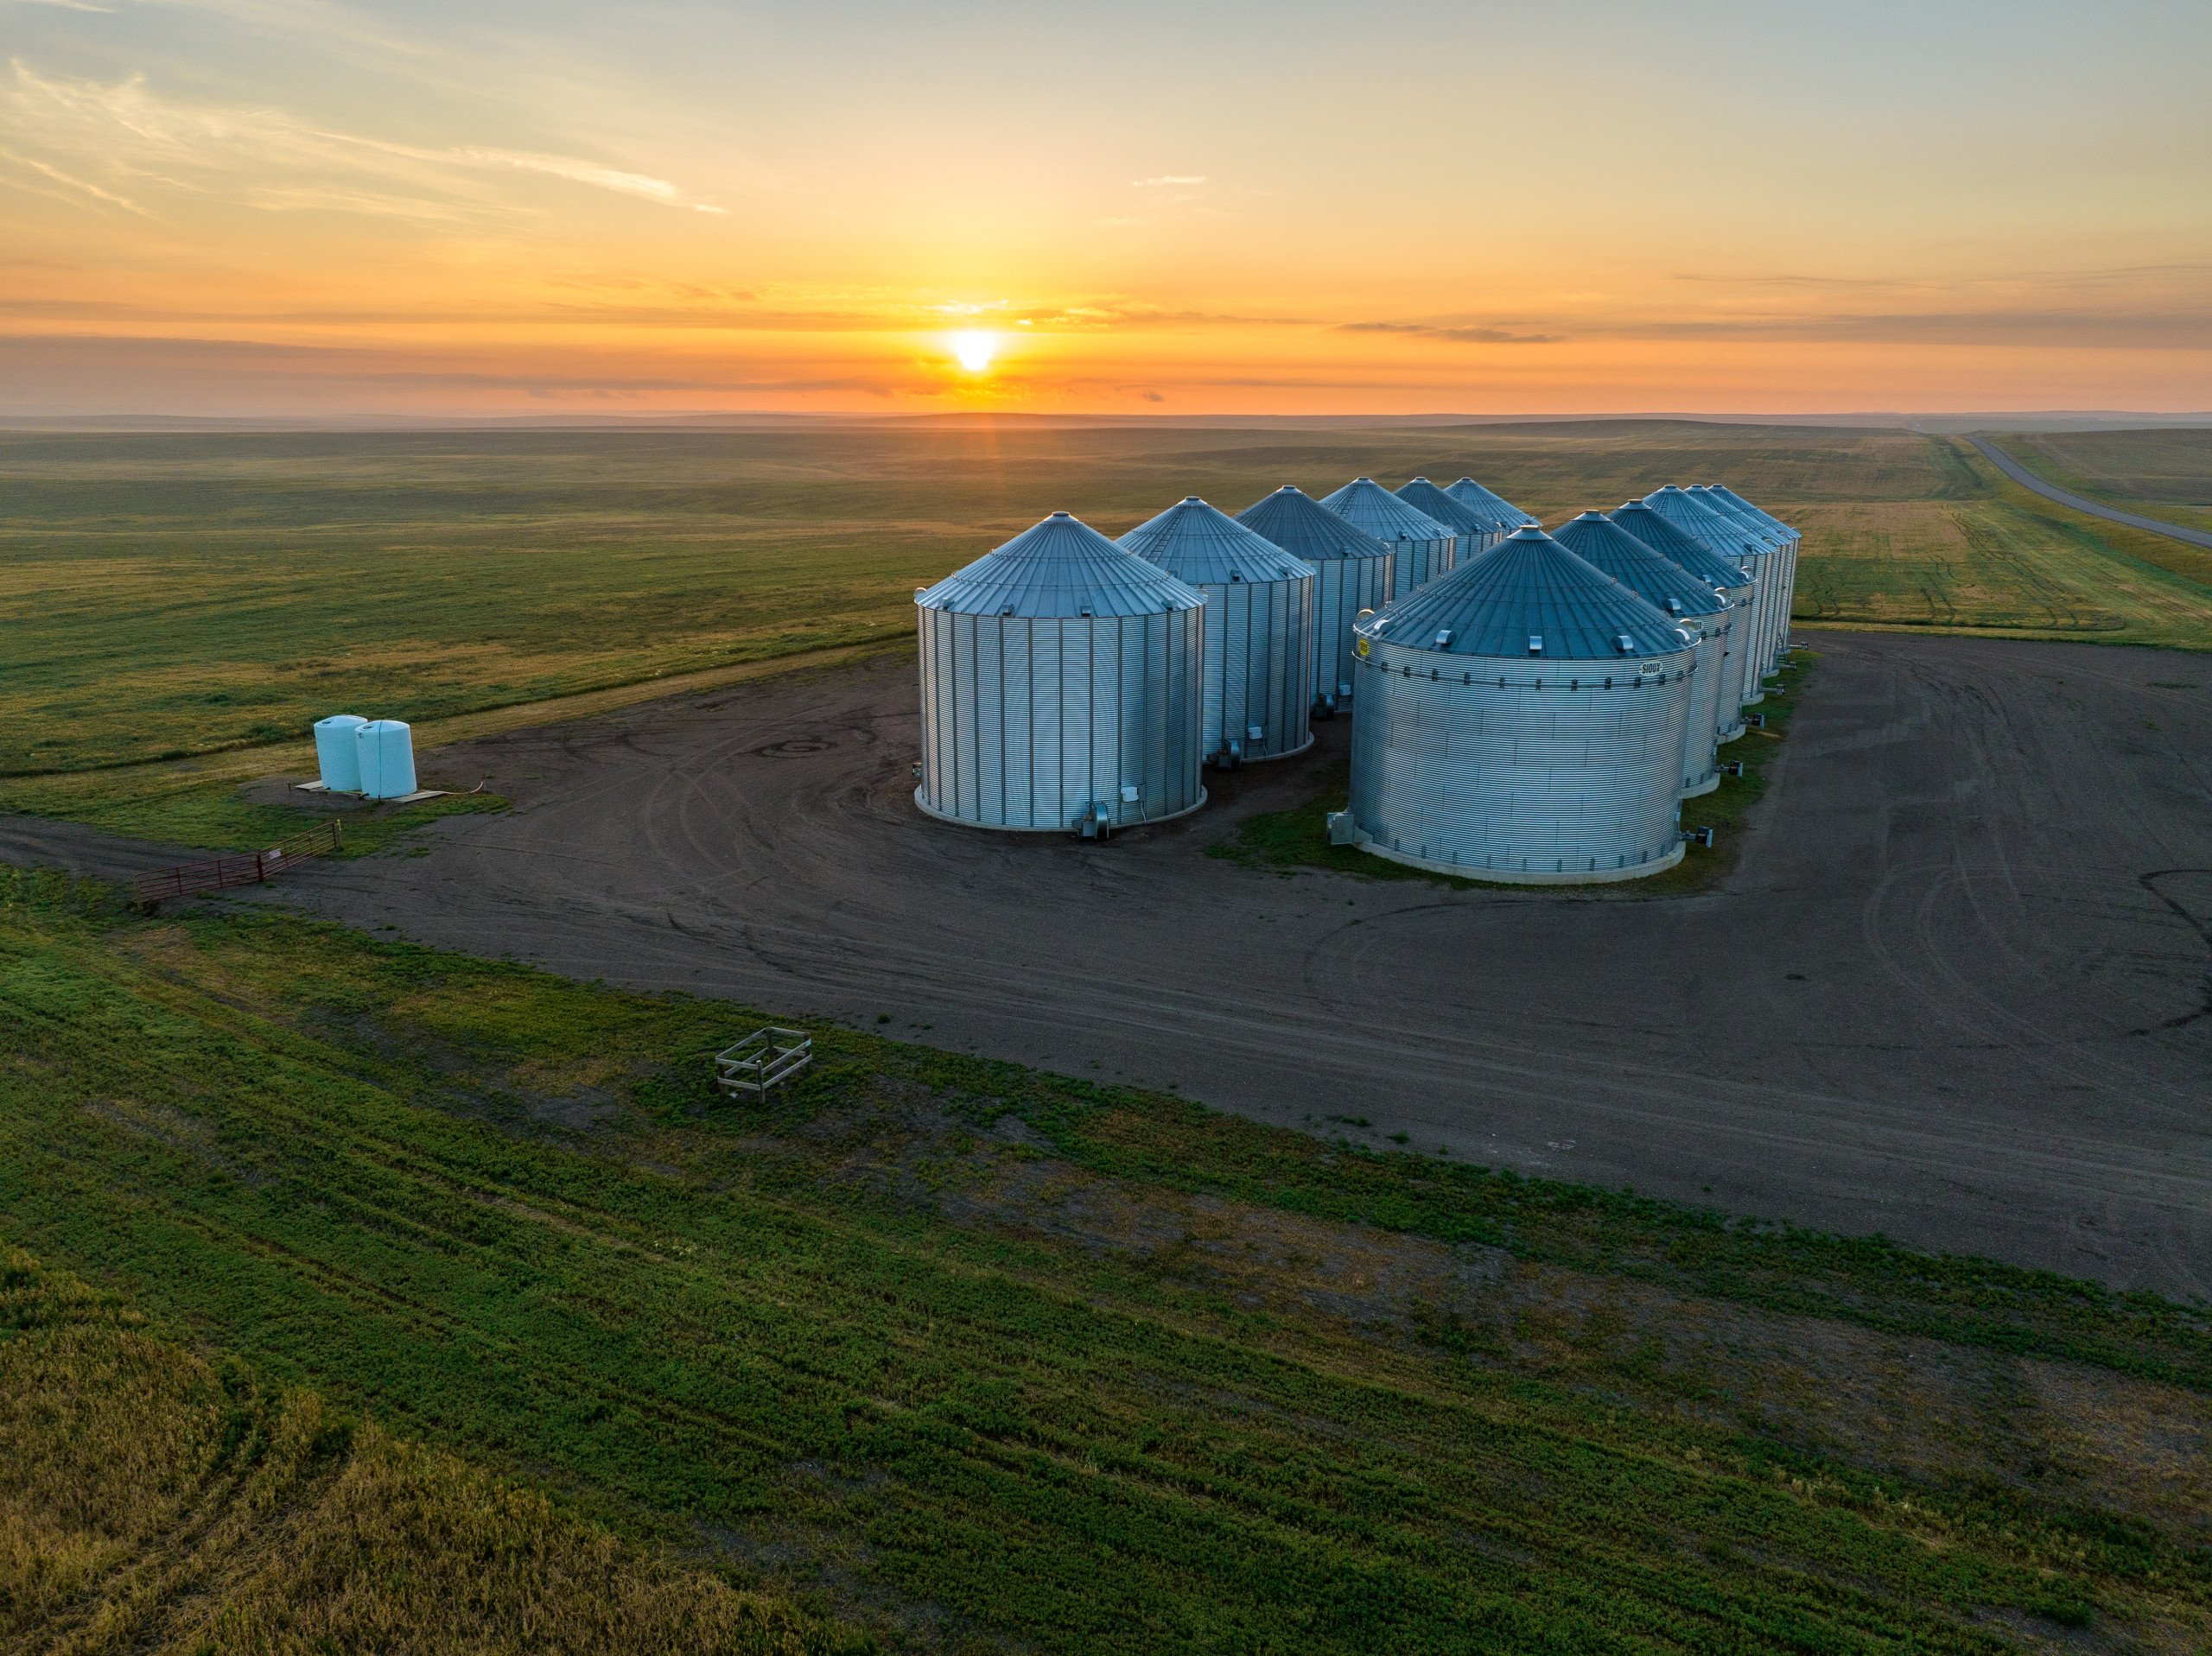 auctions-stanley-county-south-dakota-34000-acres-listing-number-16610-DJI_0408-1-2.jpg